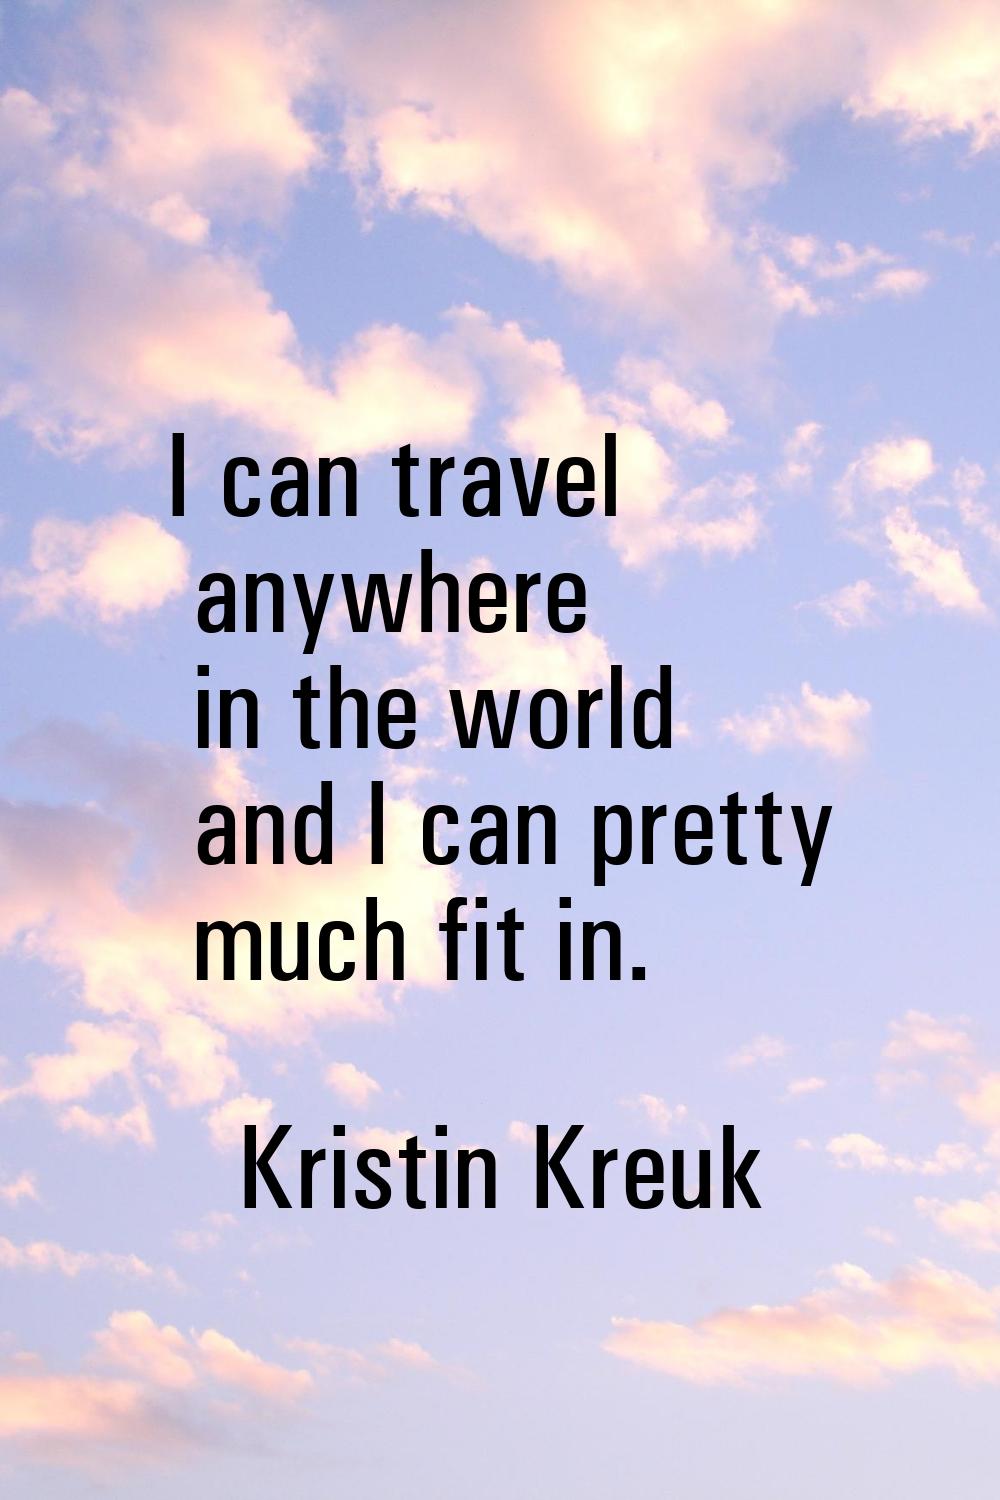 I can travel anywhere in the world and I can pretty much fit in.